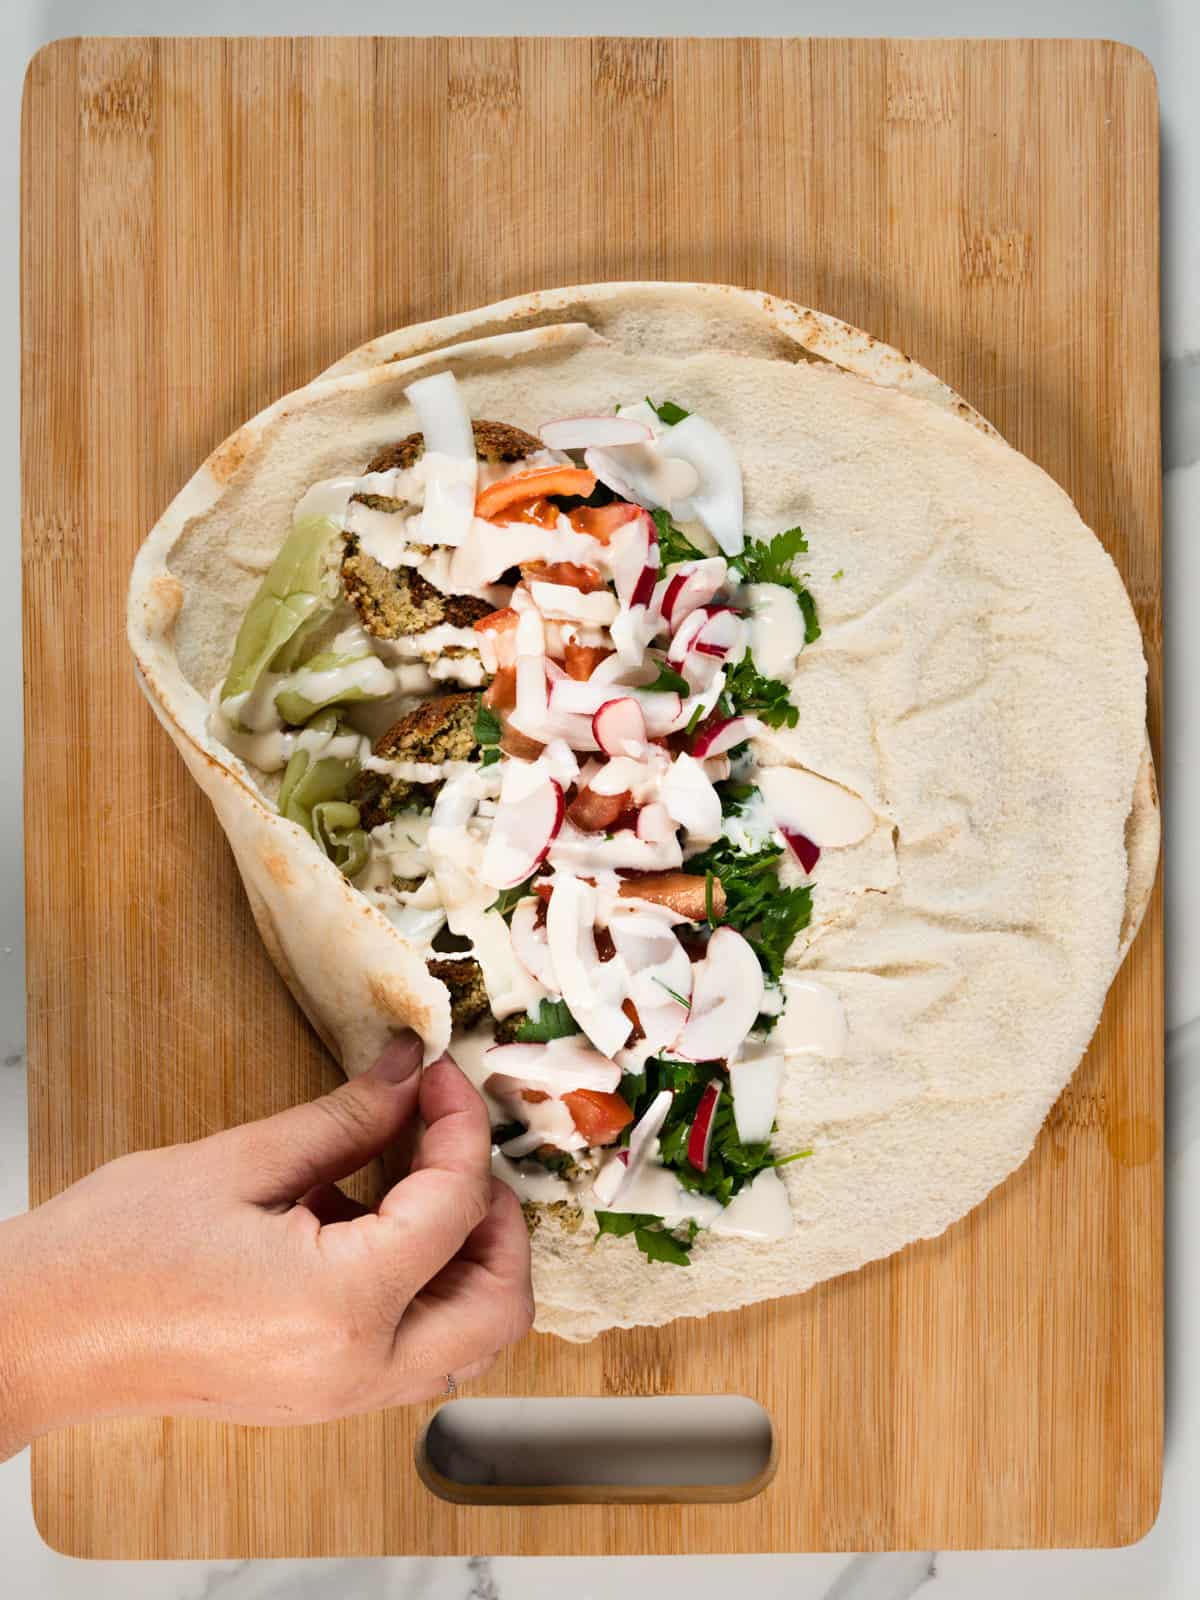 a female hand holding the edge of a round pita bread filled with chopped veggies, white sauce and squashed falafel